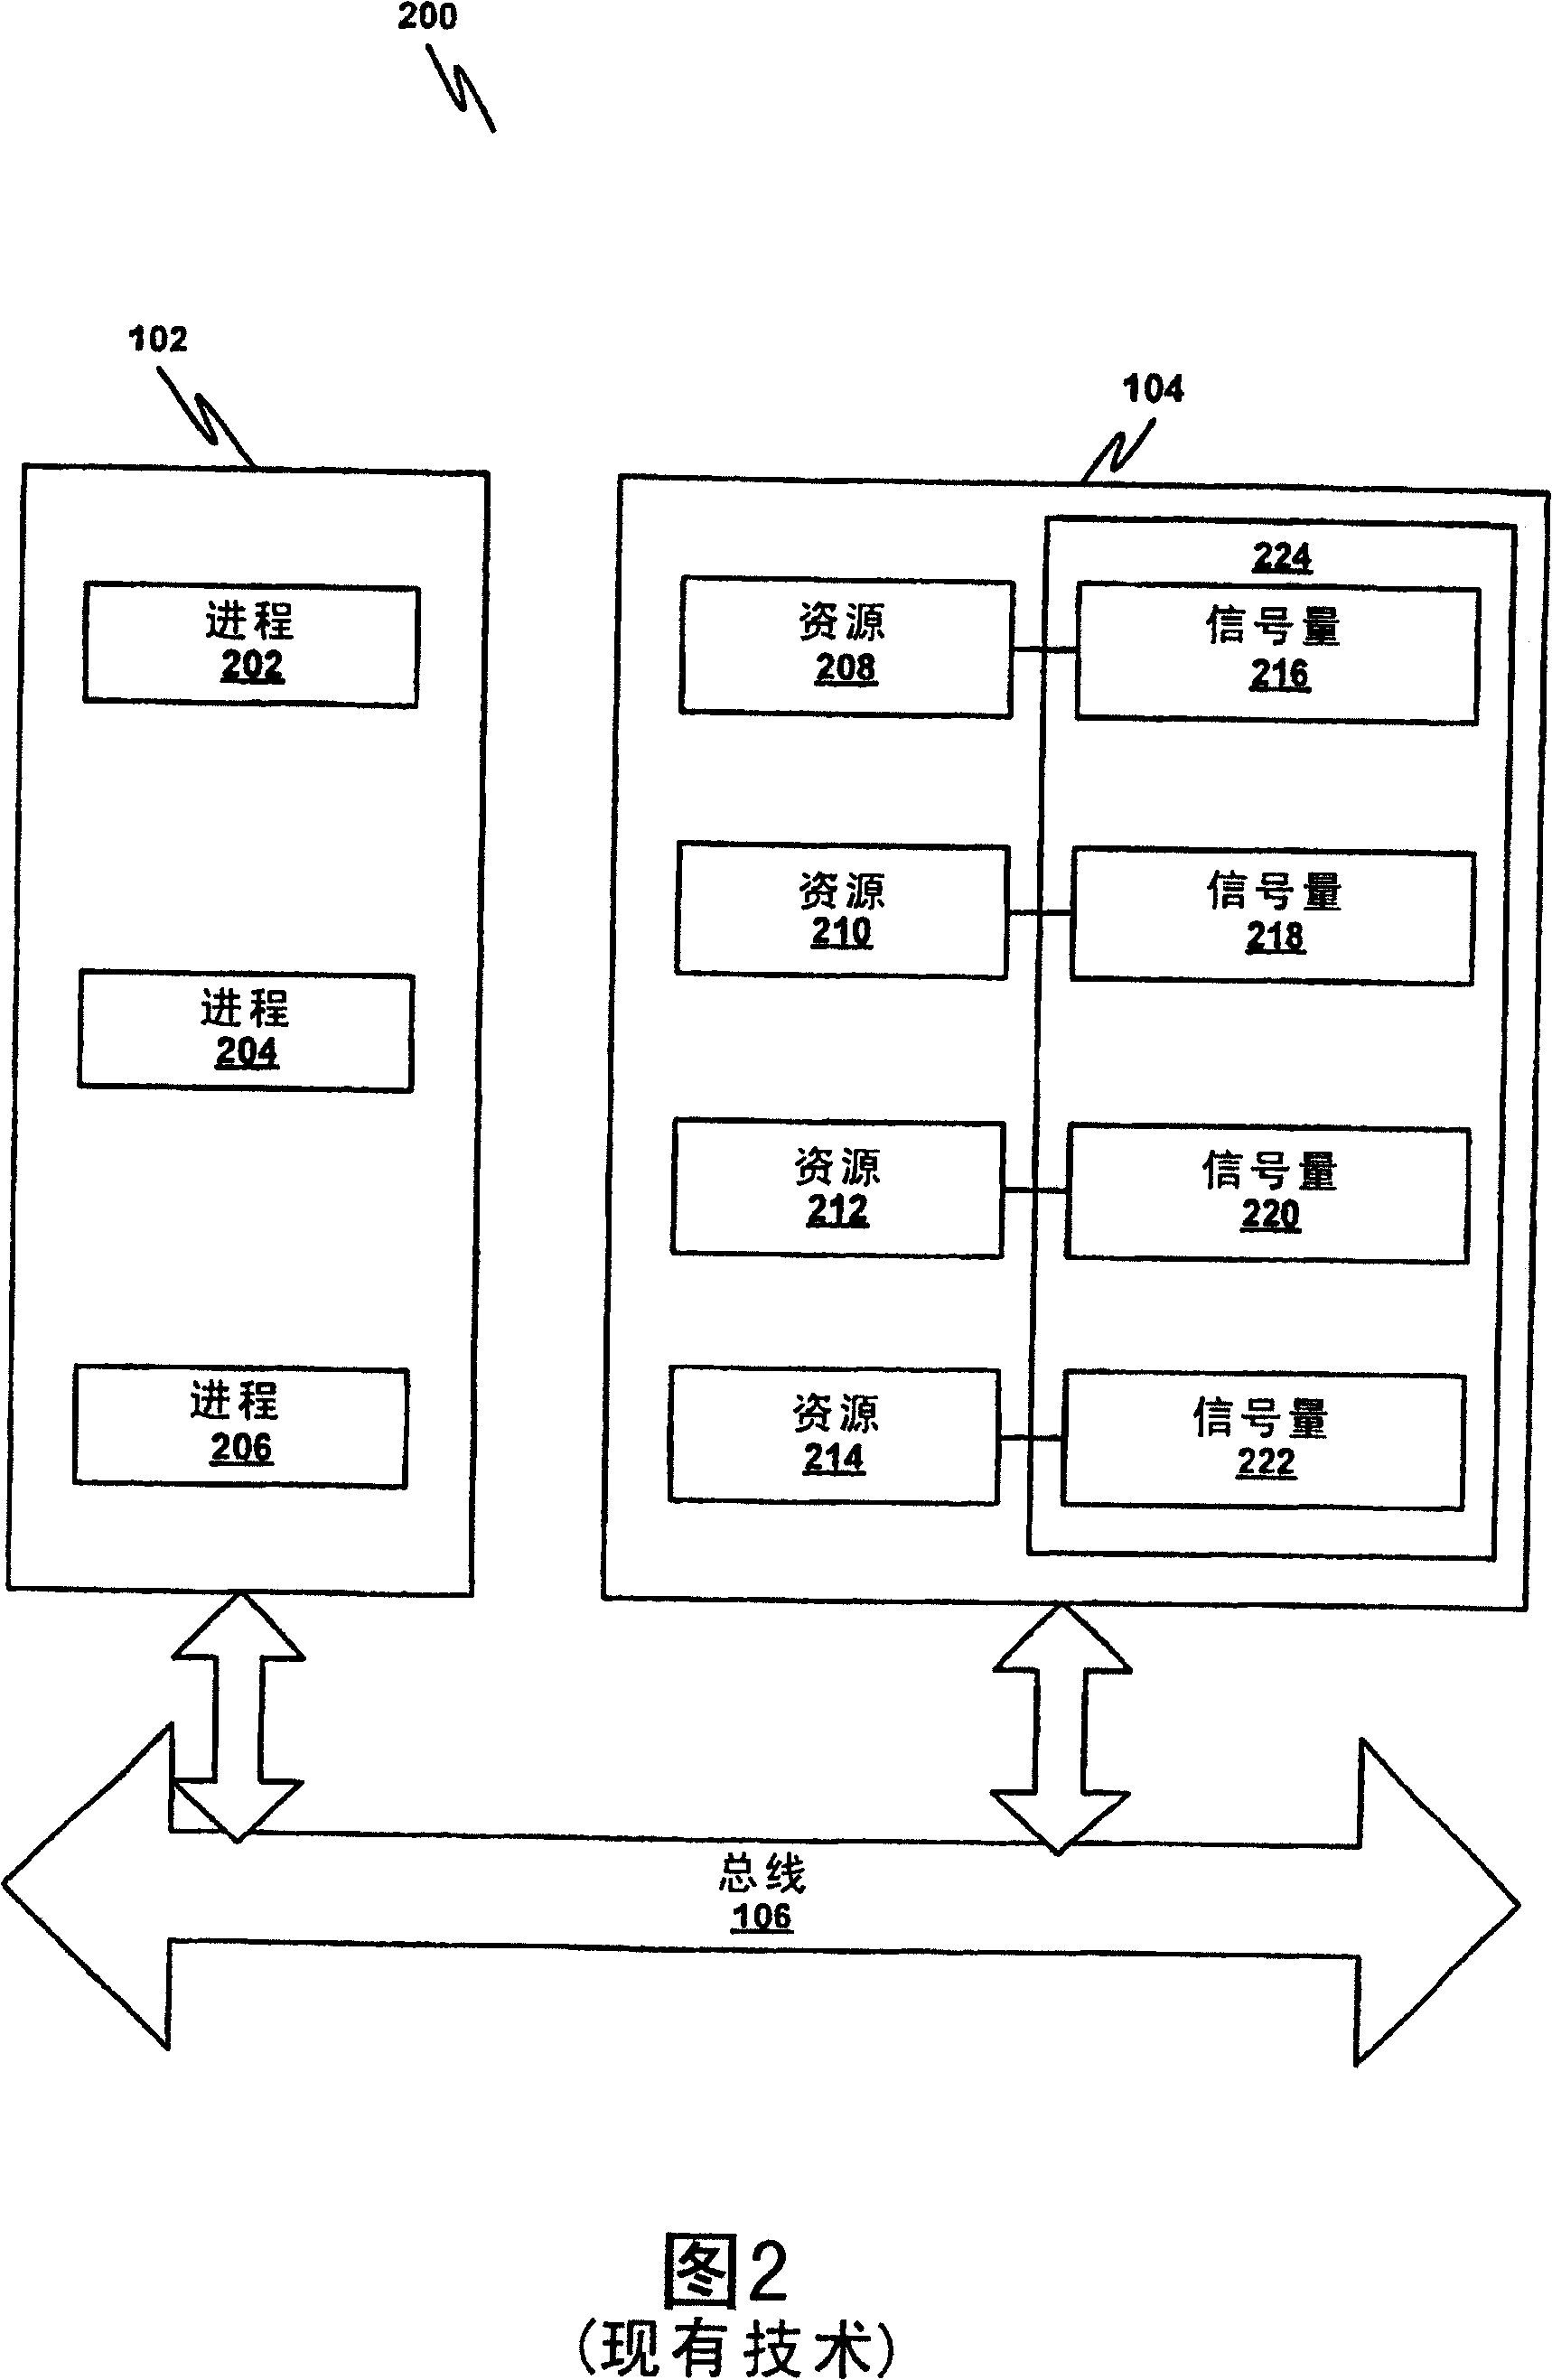 Semaphore system based on process events